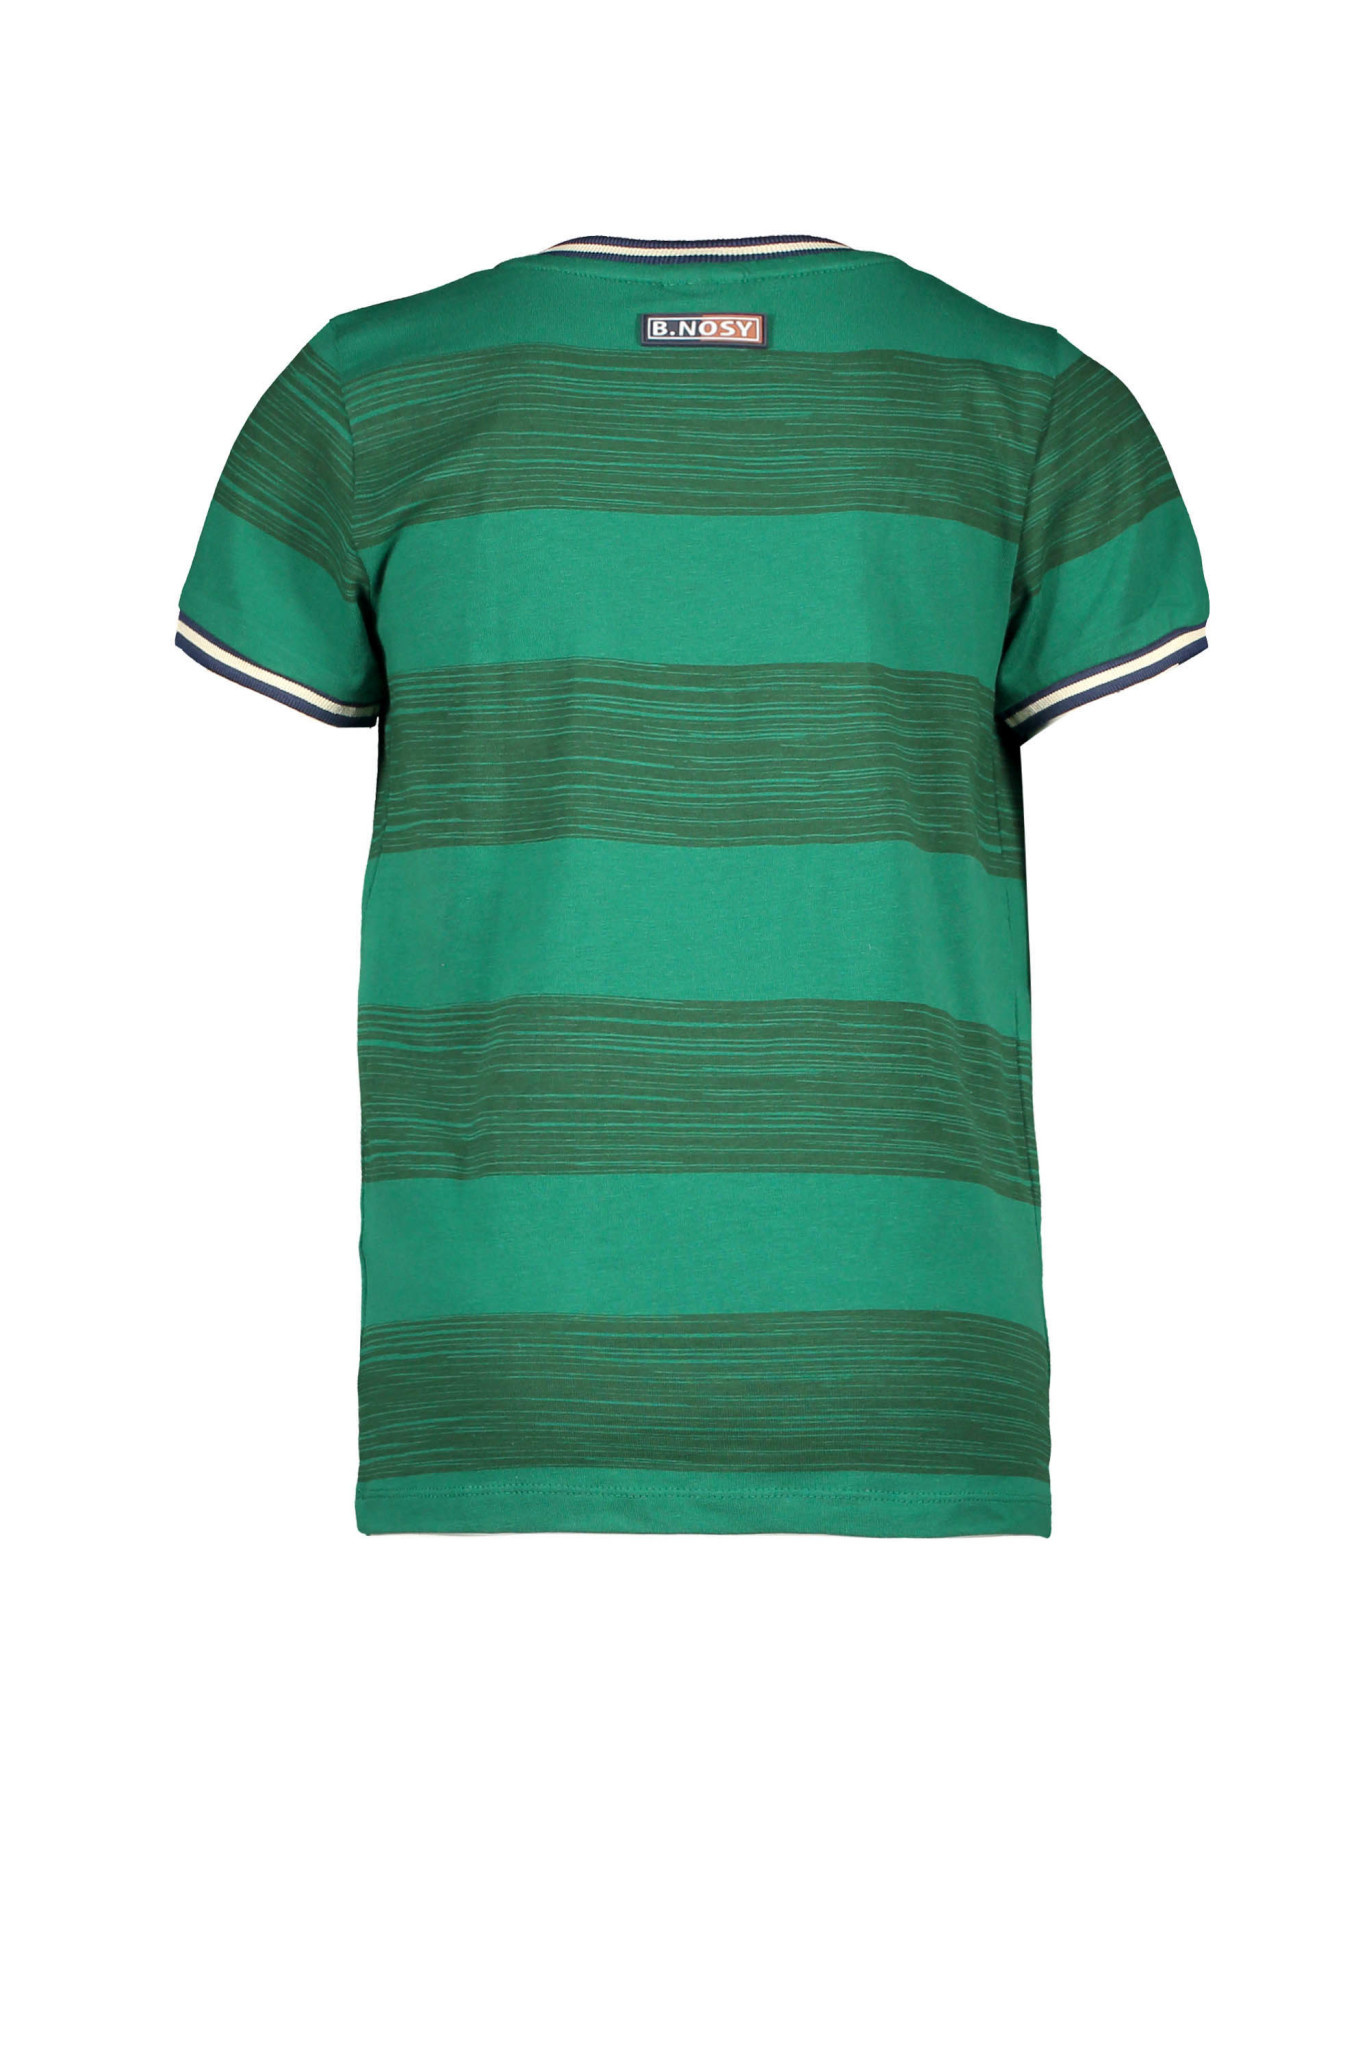 College Sports Striped Tee - Evergreen